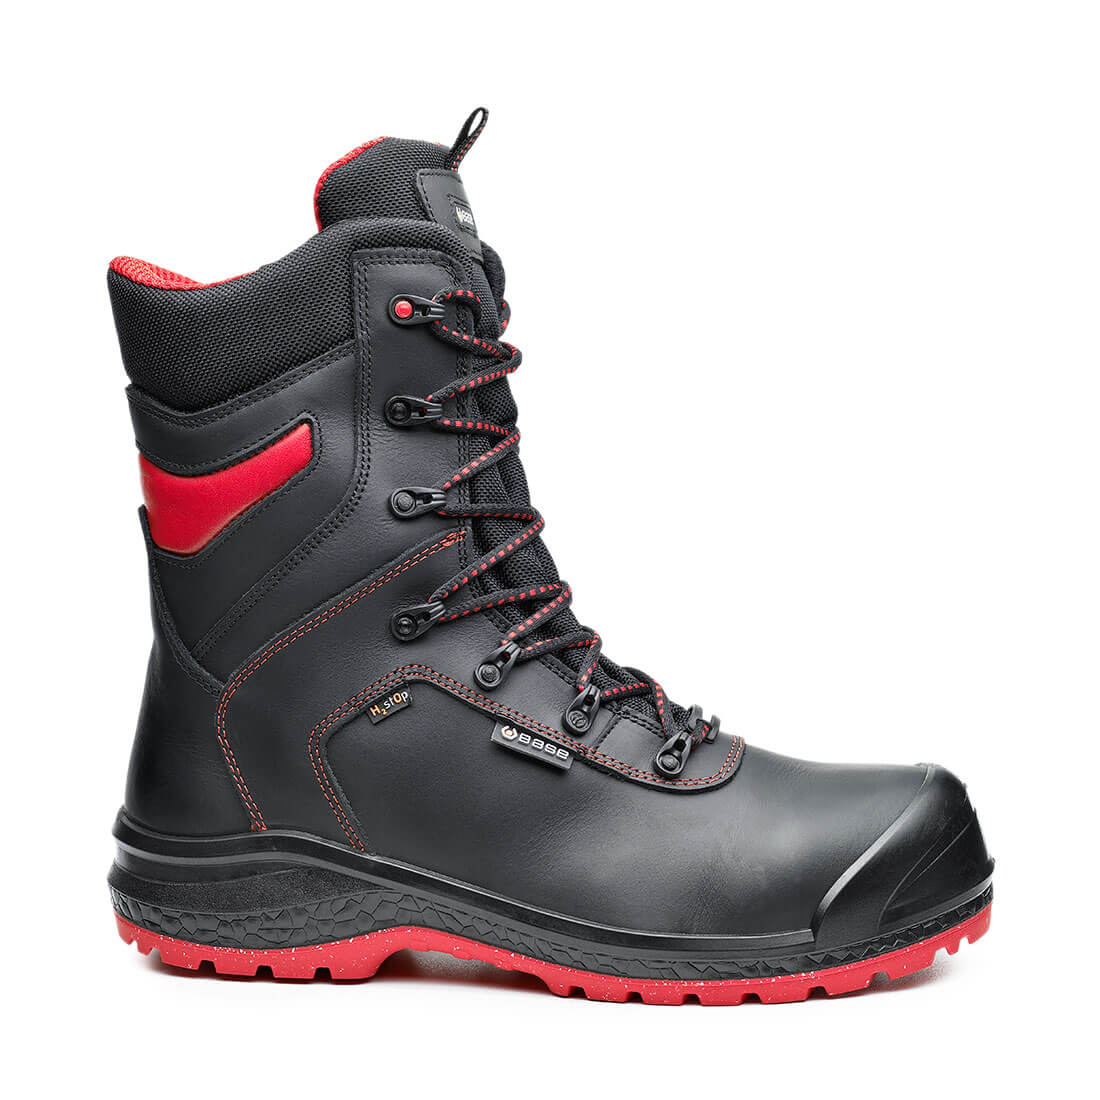 Base Be-Dry Top Toe Cap Work Safety Boots Black/Red 1#colour_black-red